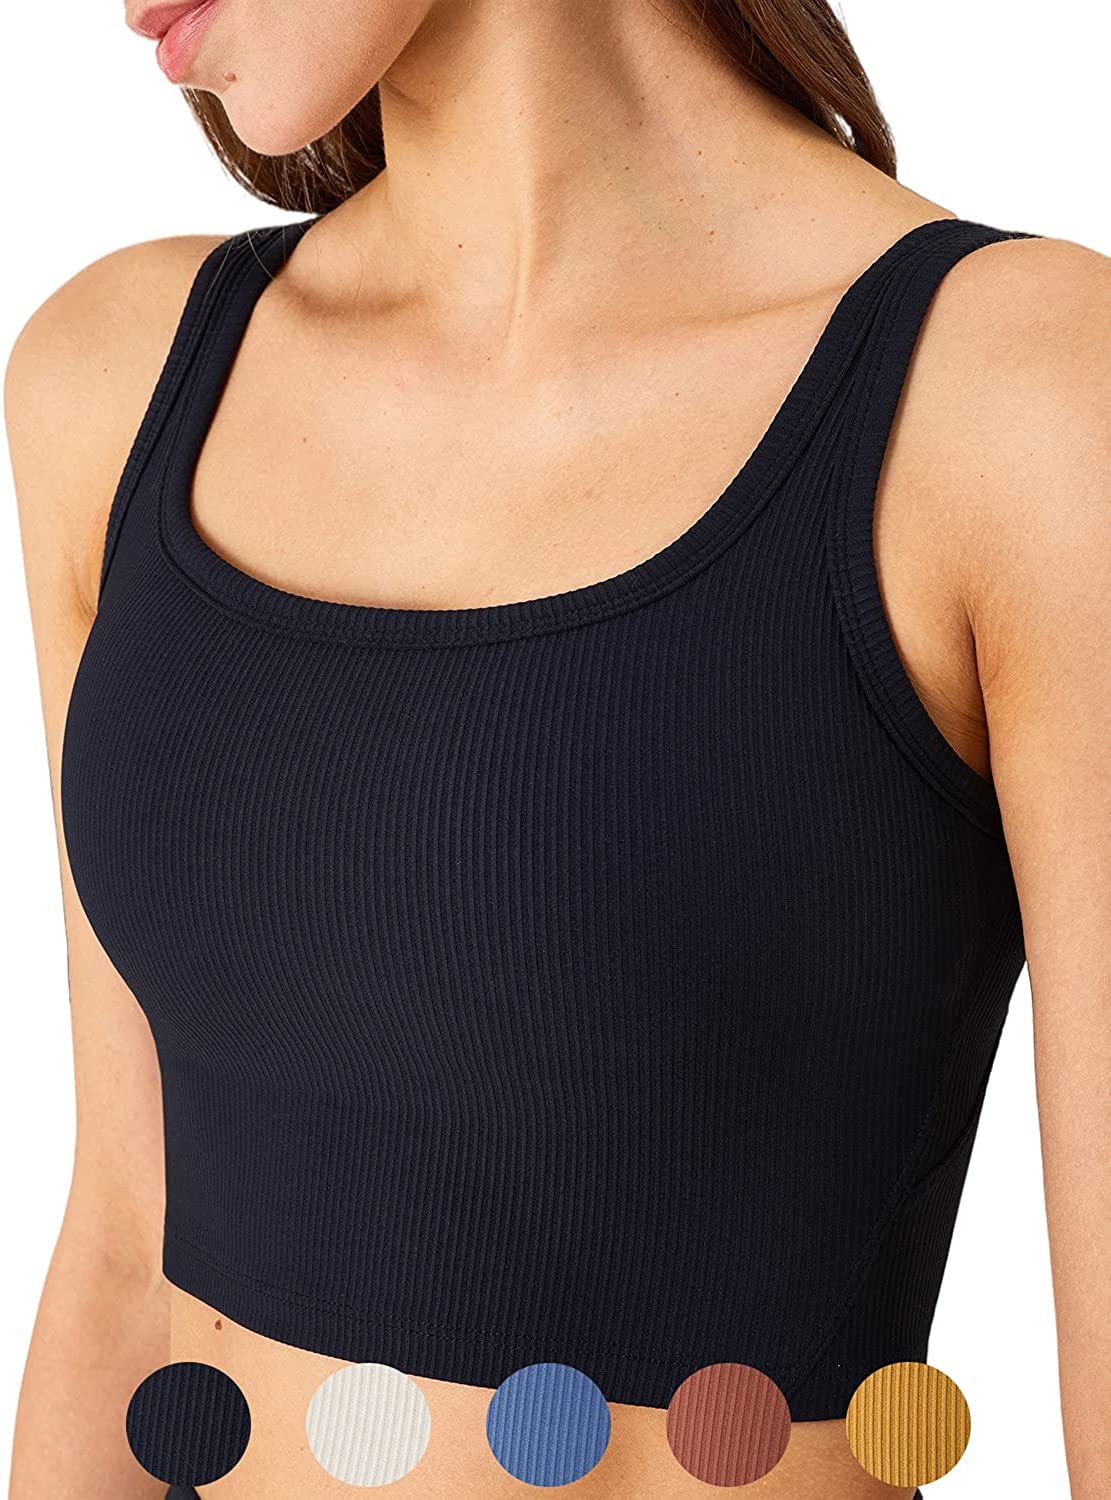 Fashion Women Camisole Tank Tops Padded Bra Summer Top Mujer Spaghetti Strap  Sleeveless Cropped Women Casual Shirts Seamless Croptop @ Best Price Online